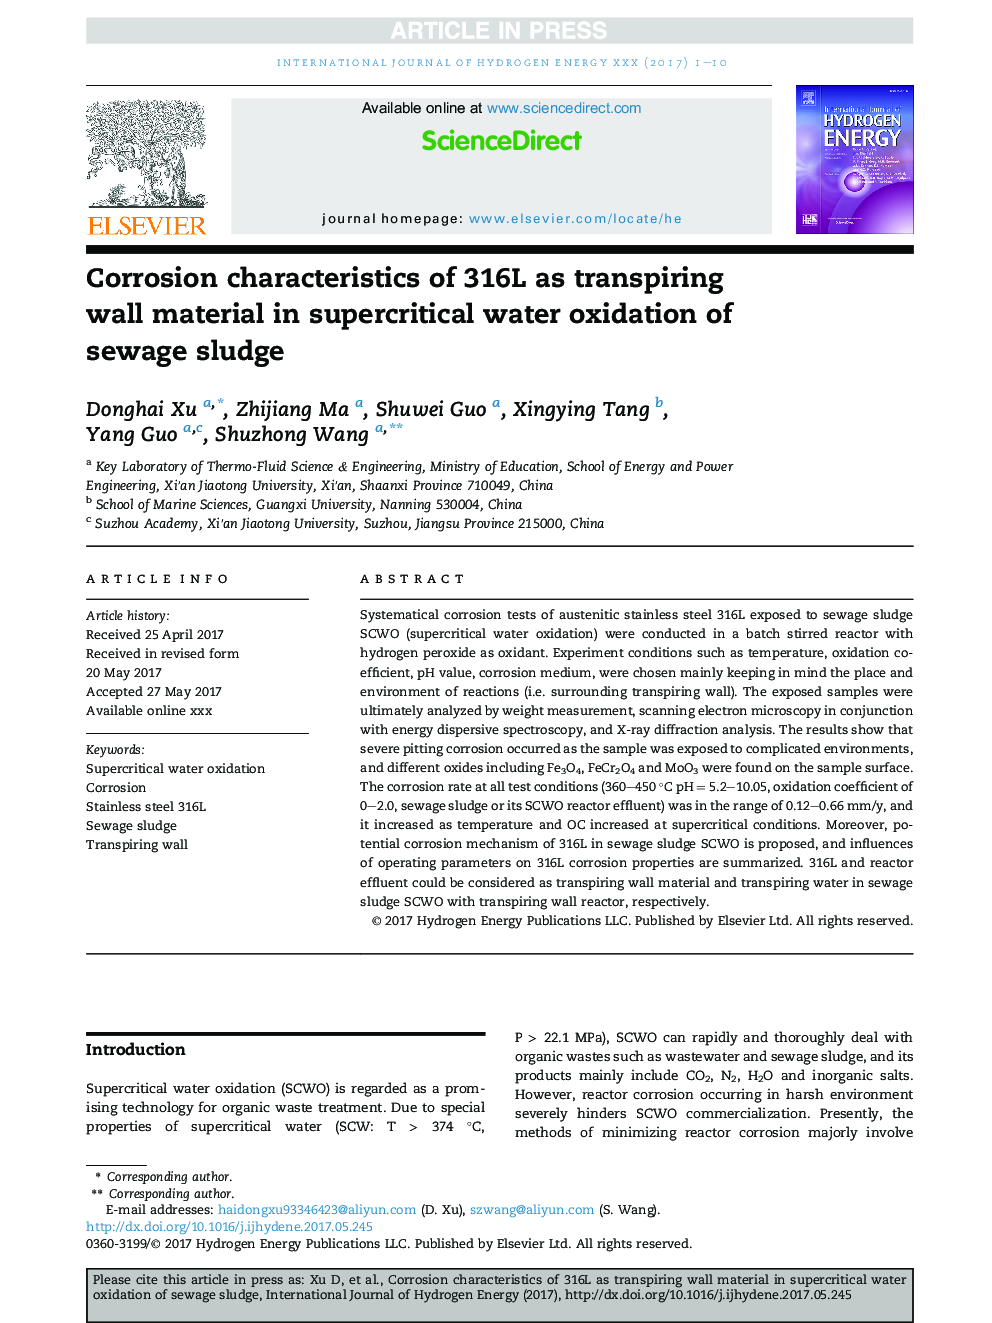 Corrosion characteristics of 316L as transpiring wall material in supercritical water oxidation of sewage sludge